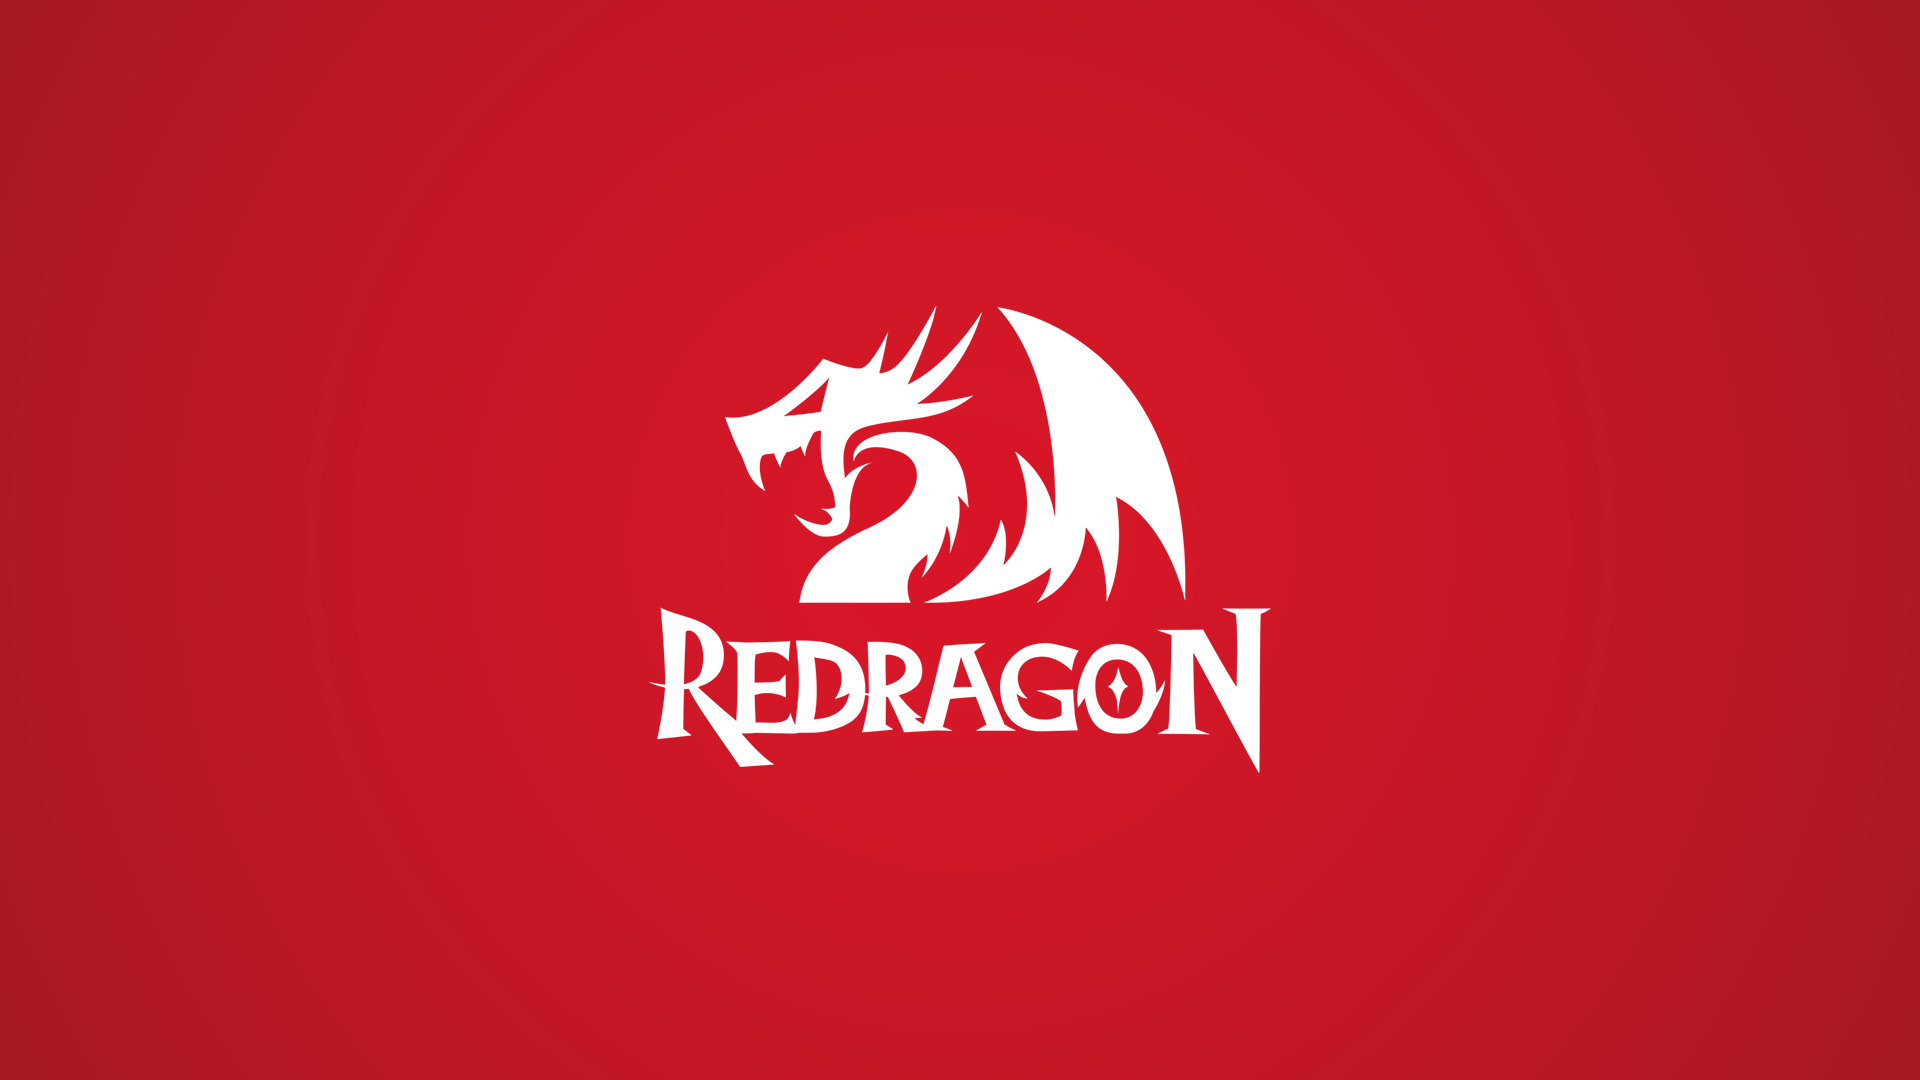 Redragon PC Gaming Red Background Simple Background Logo Wallpaper:1920x1080